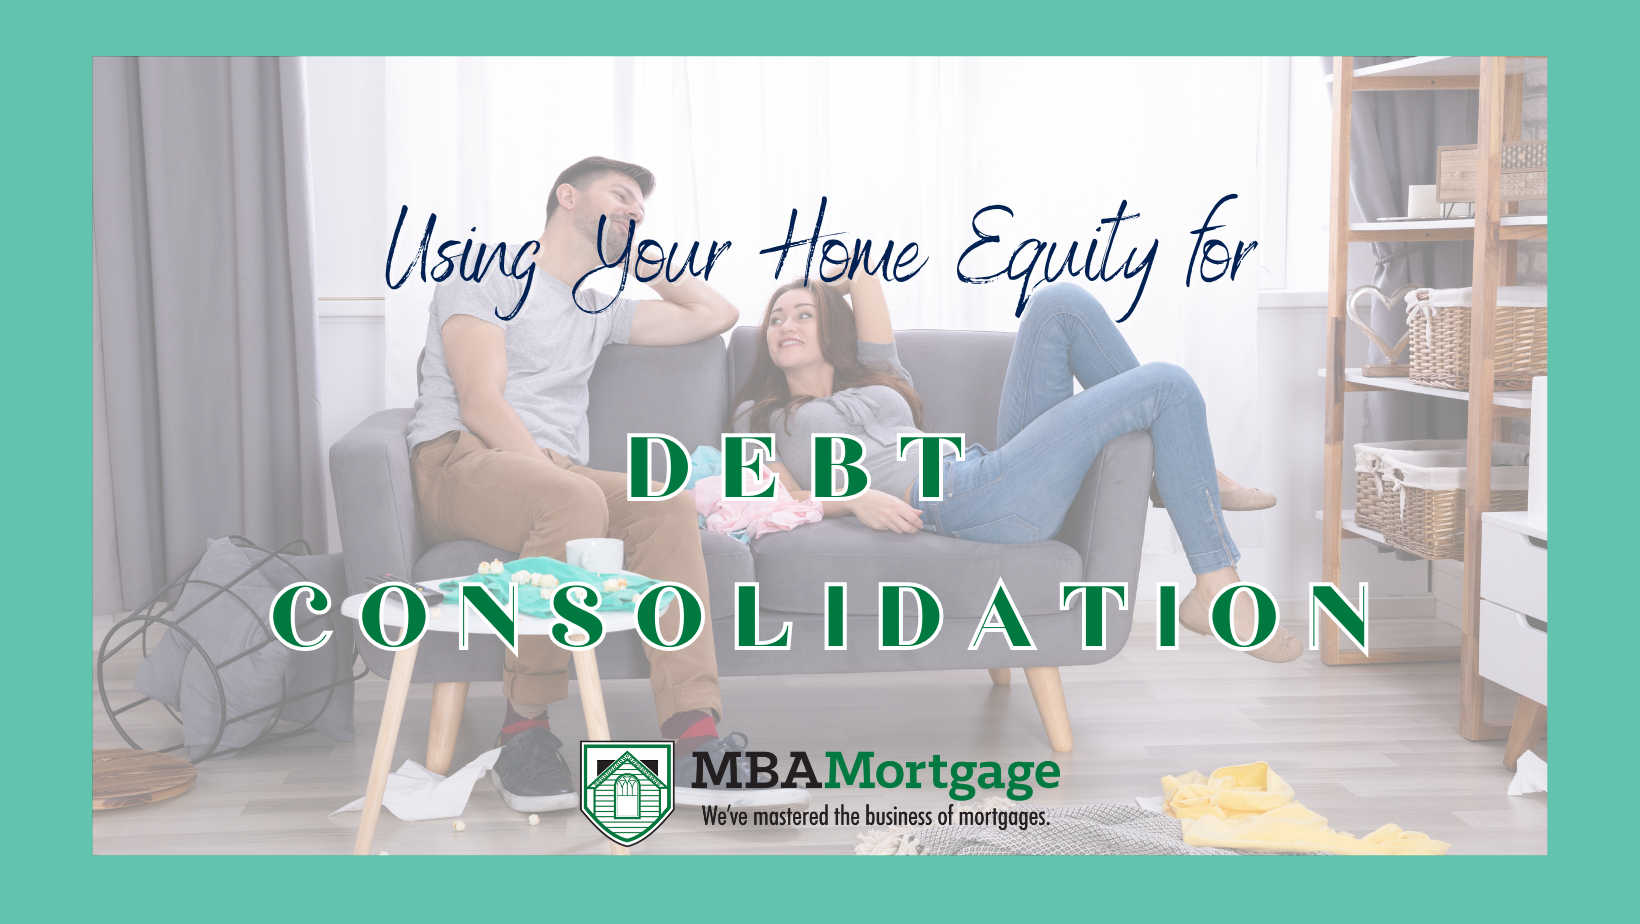 Use Home Equity For Debt Consolidation